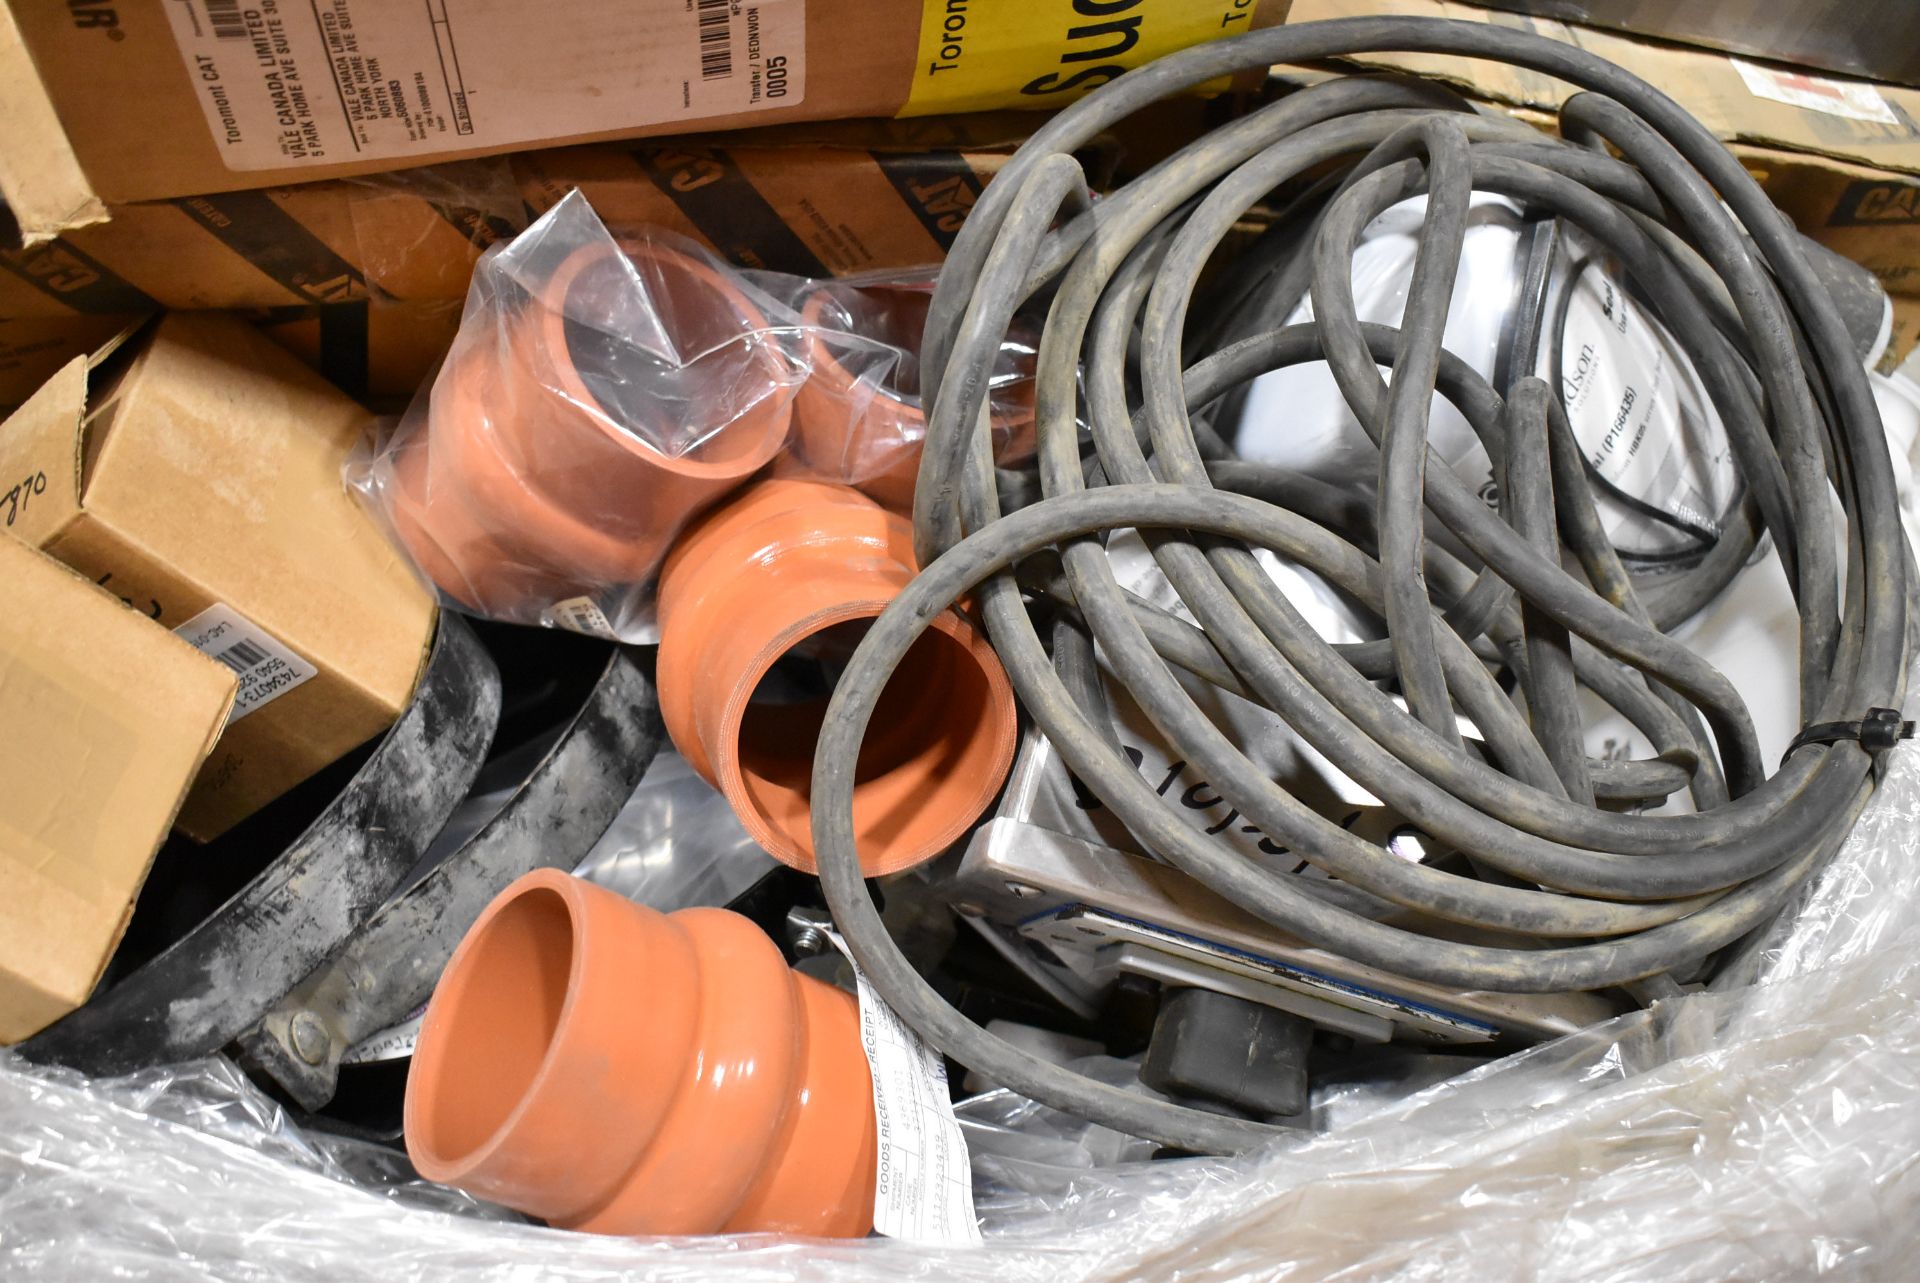 LOT/ SKID WITH MOBILE EQUIPMENT PARTS - INCLUDING FILTERS, GASKETS, HOSE, MANIFOLDS, BEARINGS, - Image 4 of 10